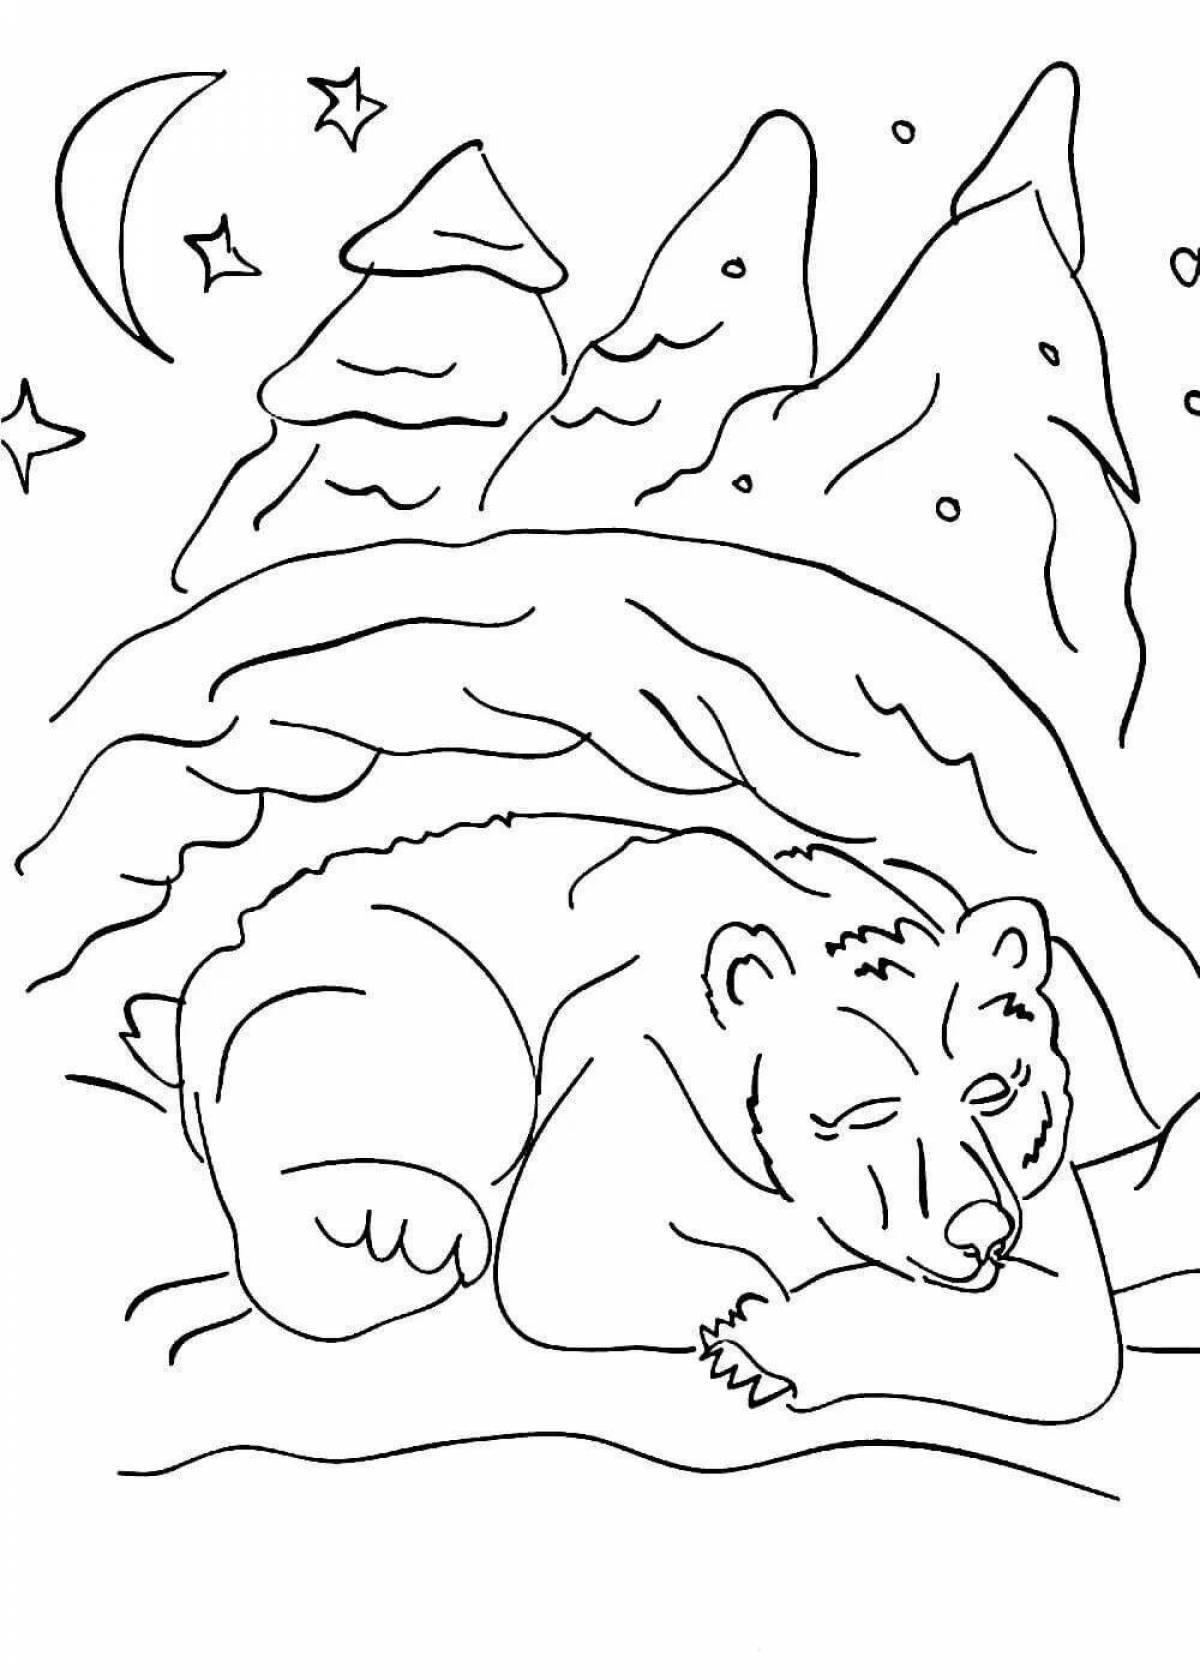 Live winter animal coloring book for kids